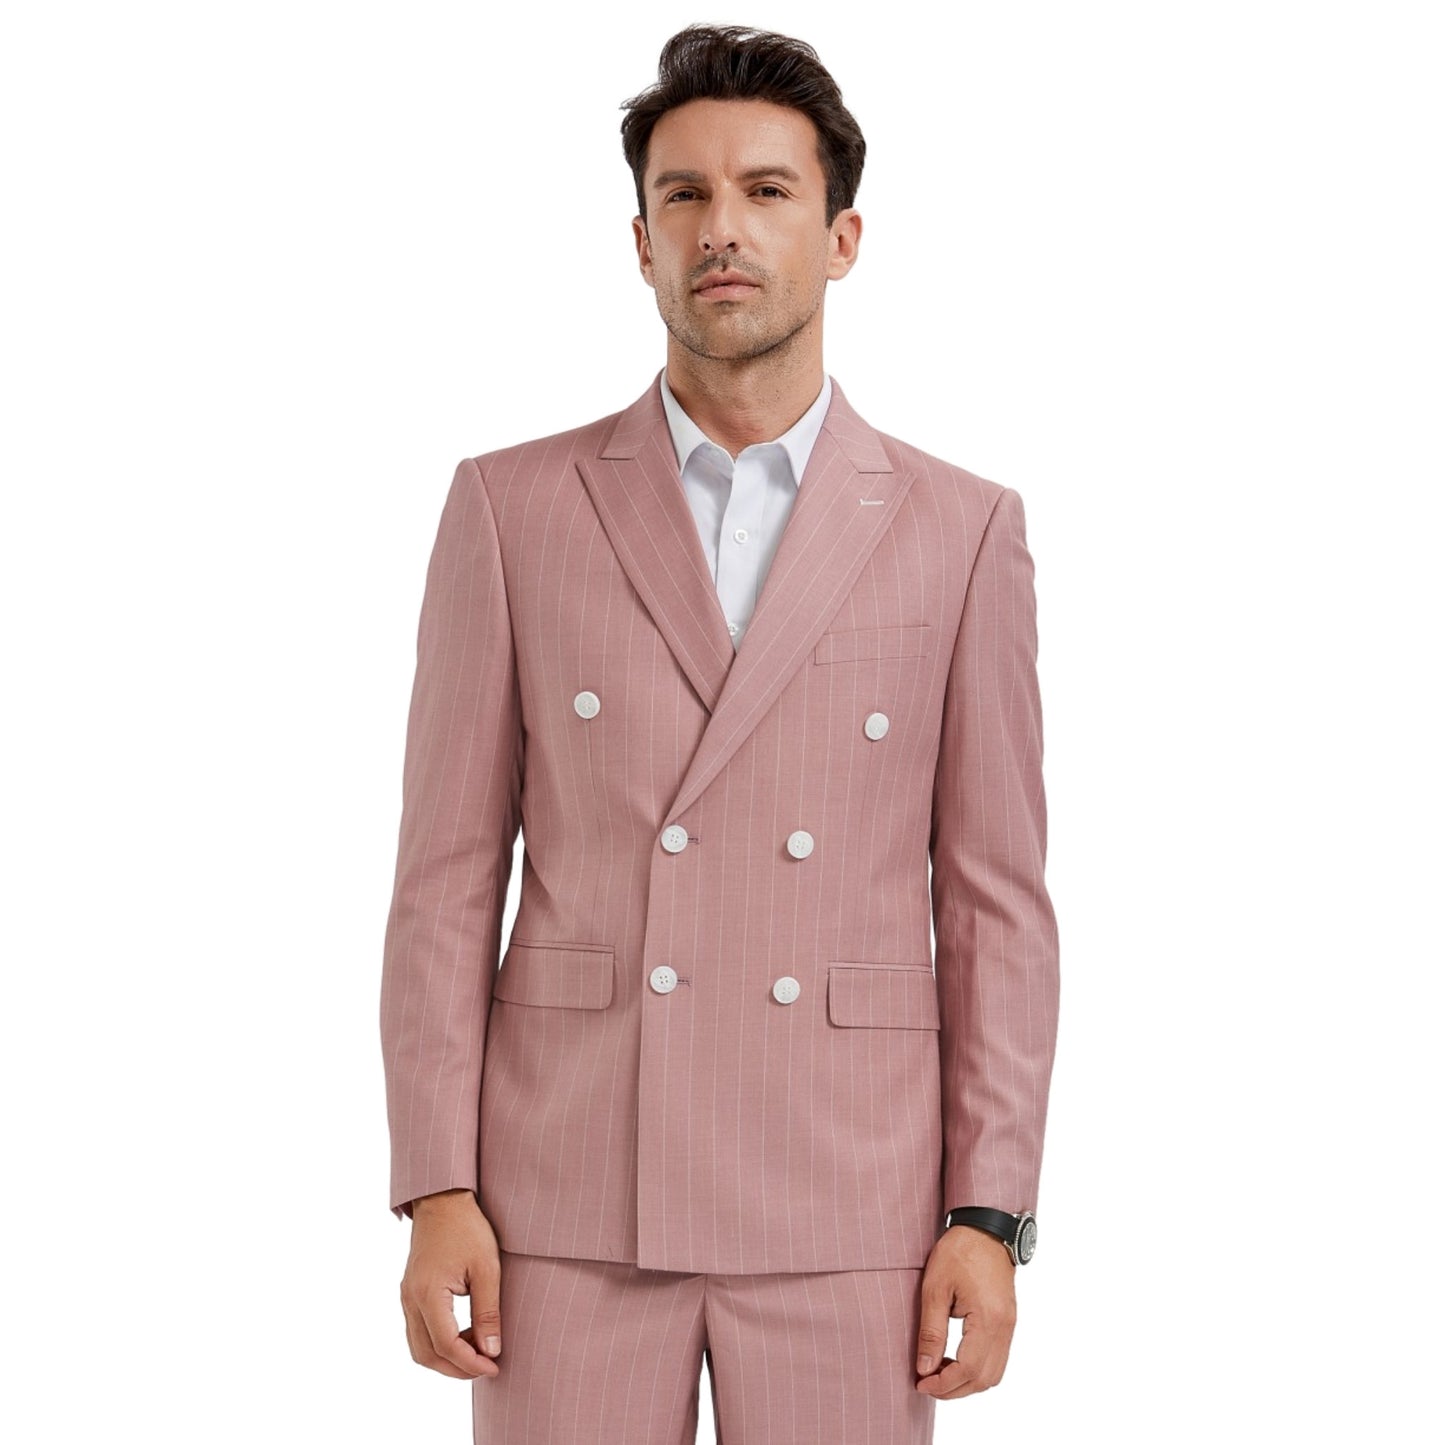 Elegant KCT Menswear Vintage Rose Pinstripe Double-Breasted Suit perfect for formal and professional settings